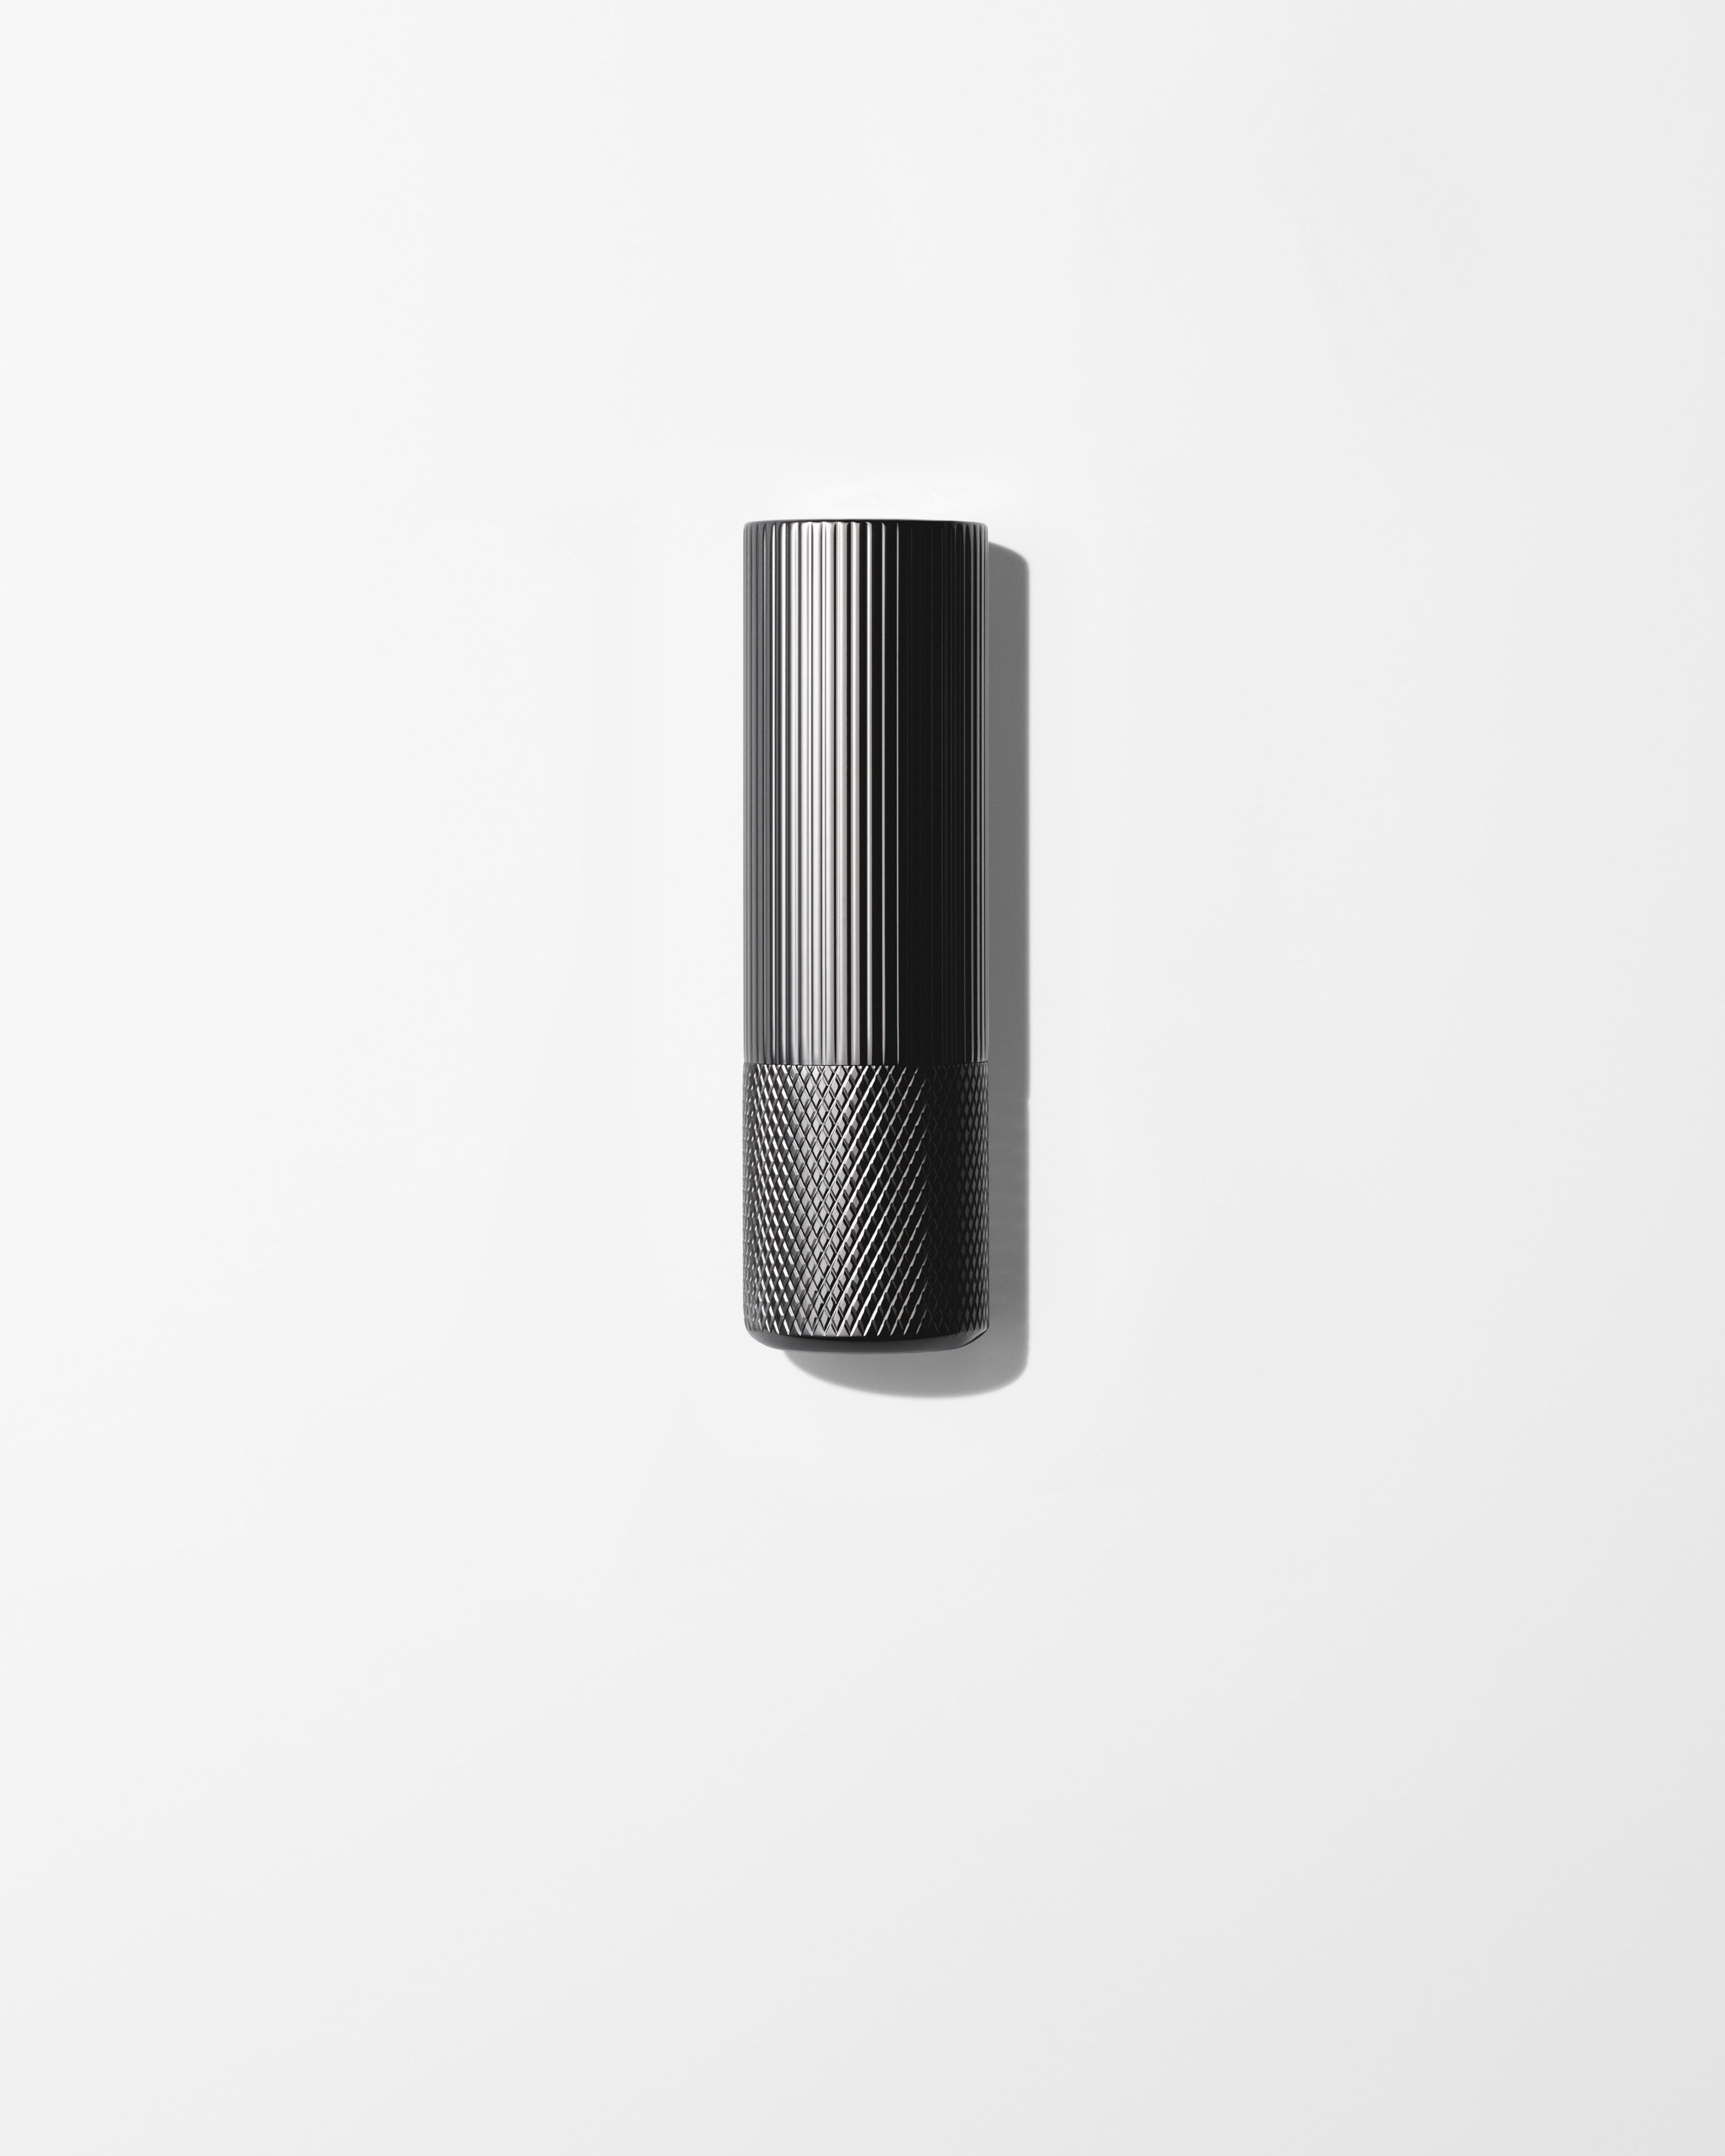 Anti-rouge lip balm laying on a grey surface